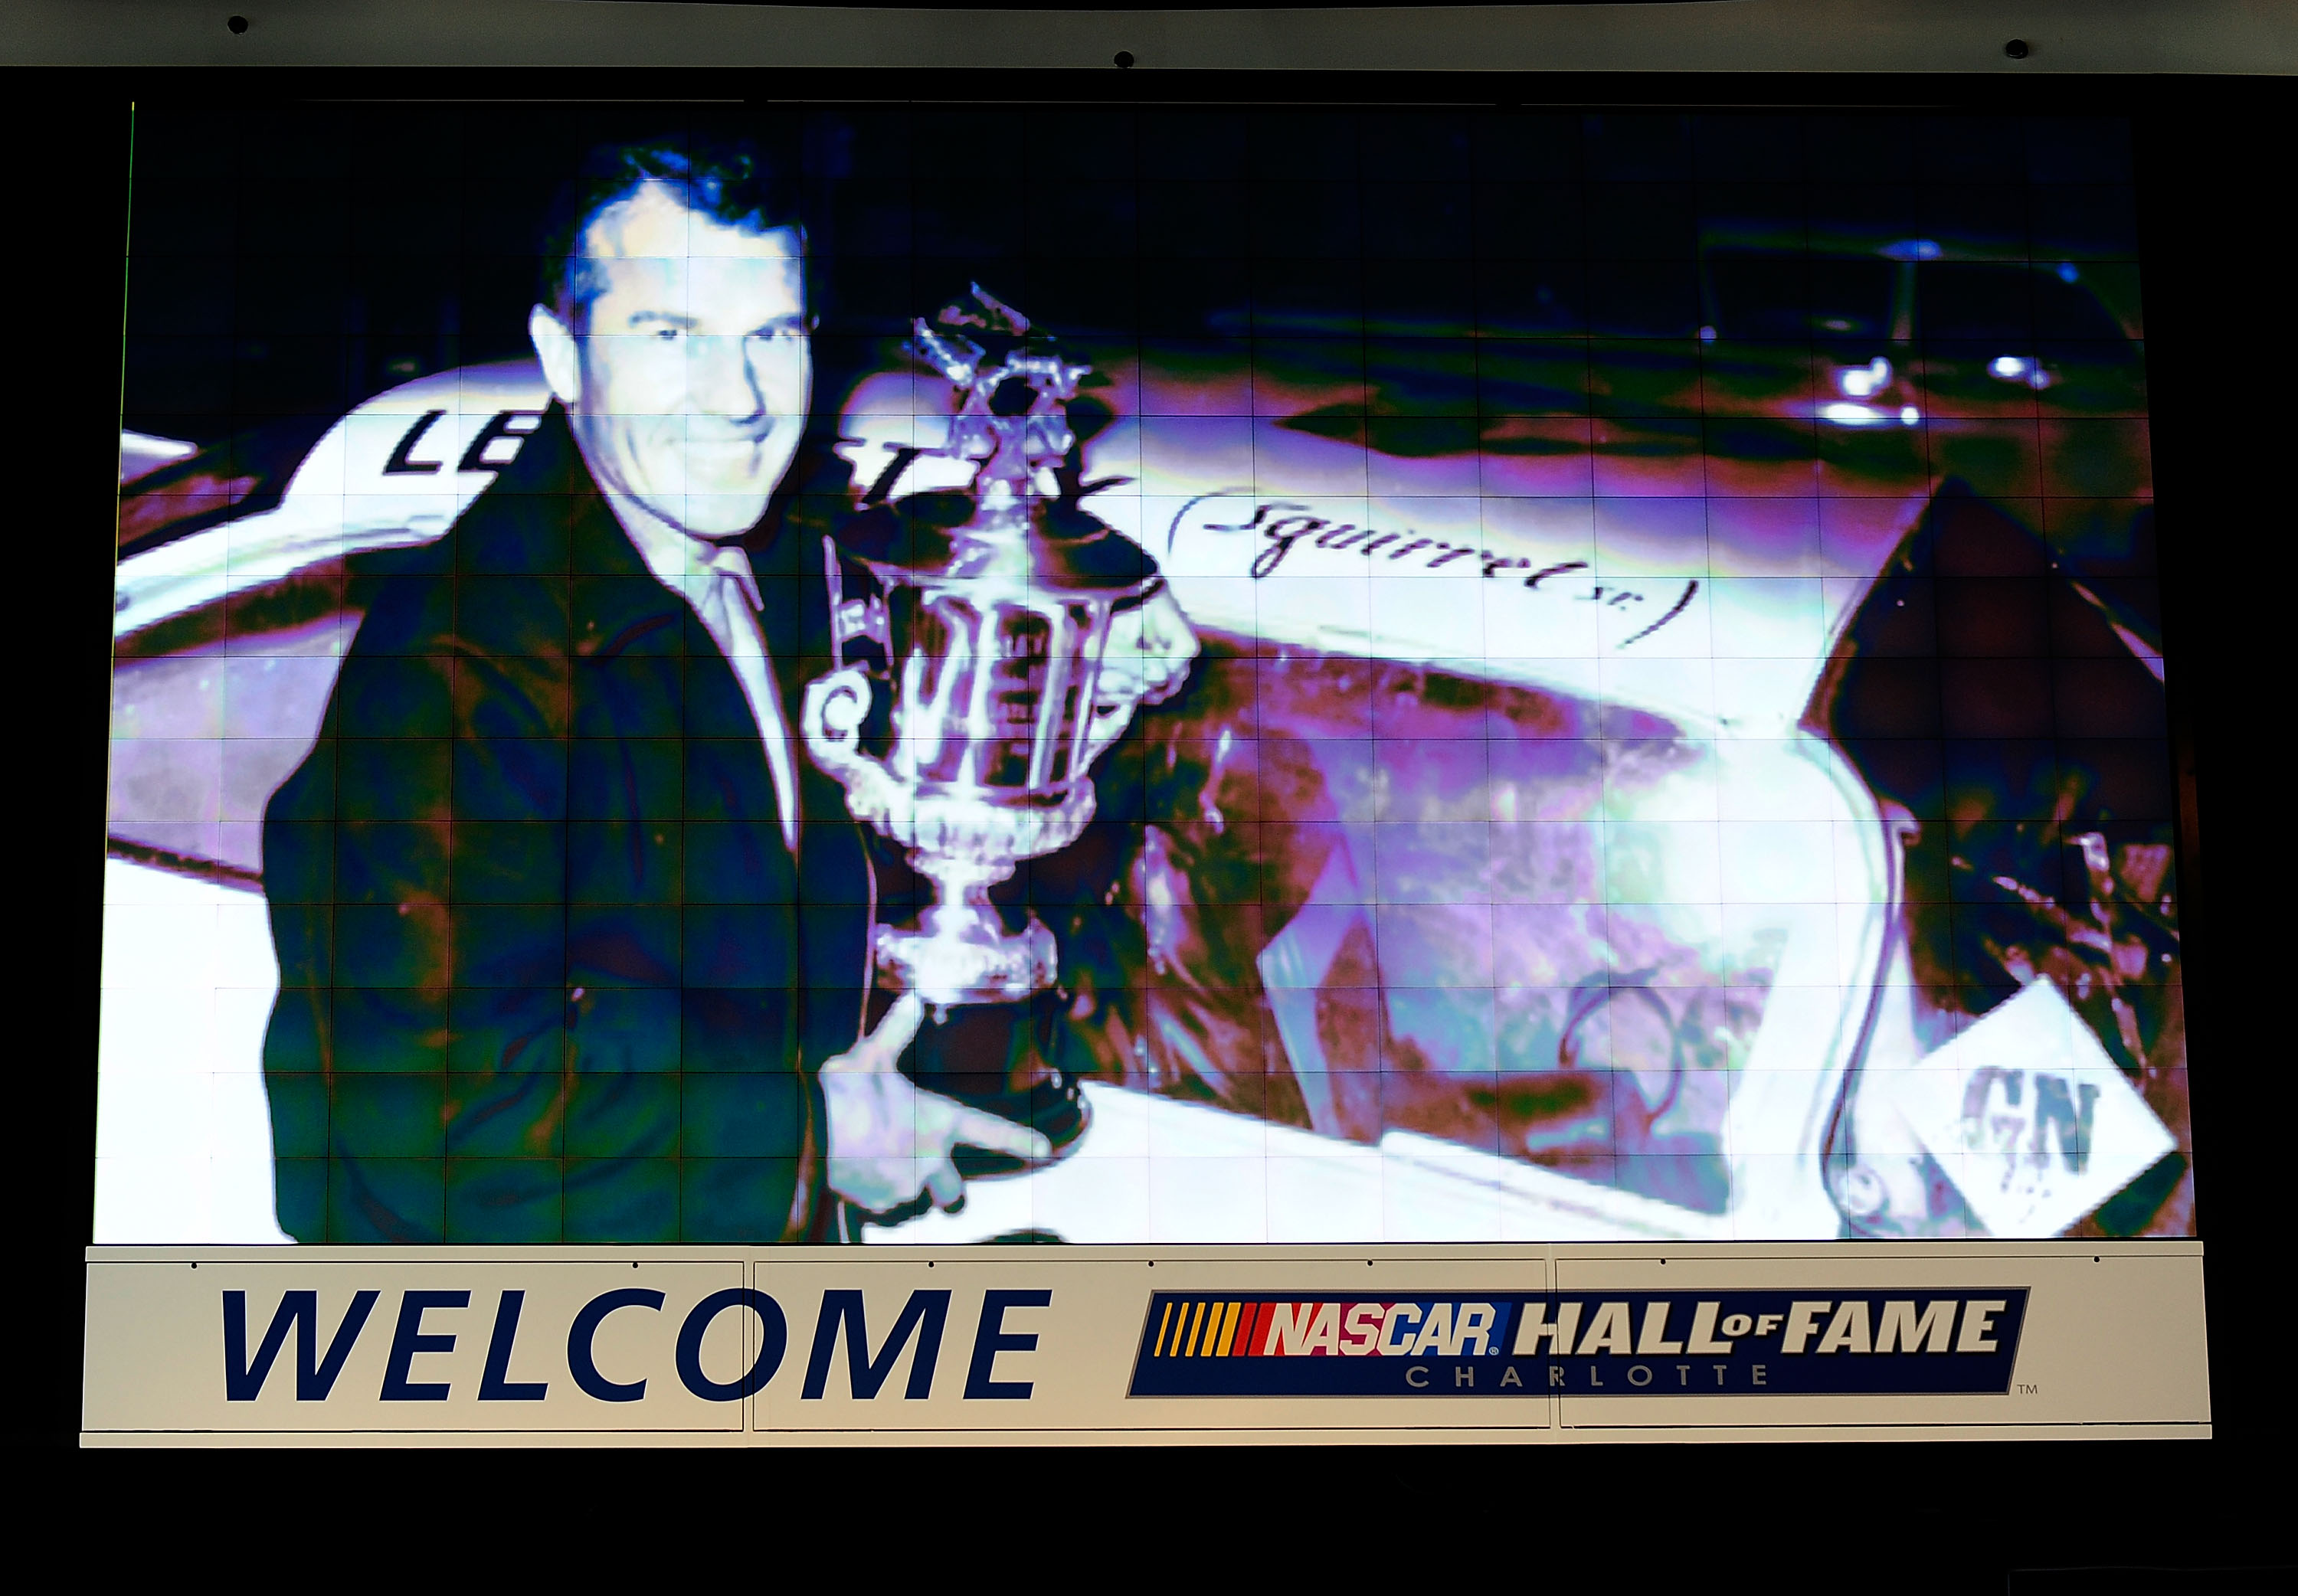 CHARLOTTE, NC - OCTOBER 13:   An image of Lee Petty on the jumbotron during NASCAR Hall of Fame Voting Day at the NASCAR Hall of Fame on October 13, 2010 in Charlotte, North Carolina.  (Photo by Rusty Jarrett/Getty Images for NASCAR)